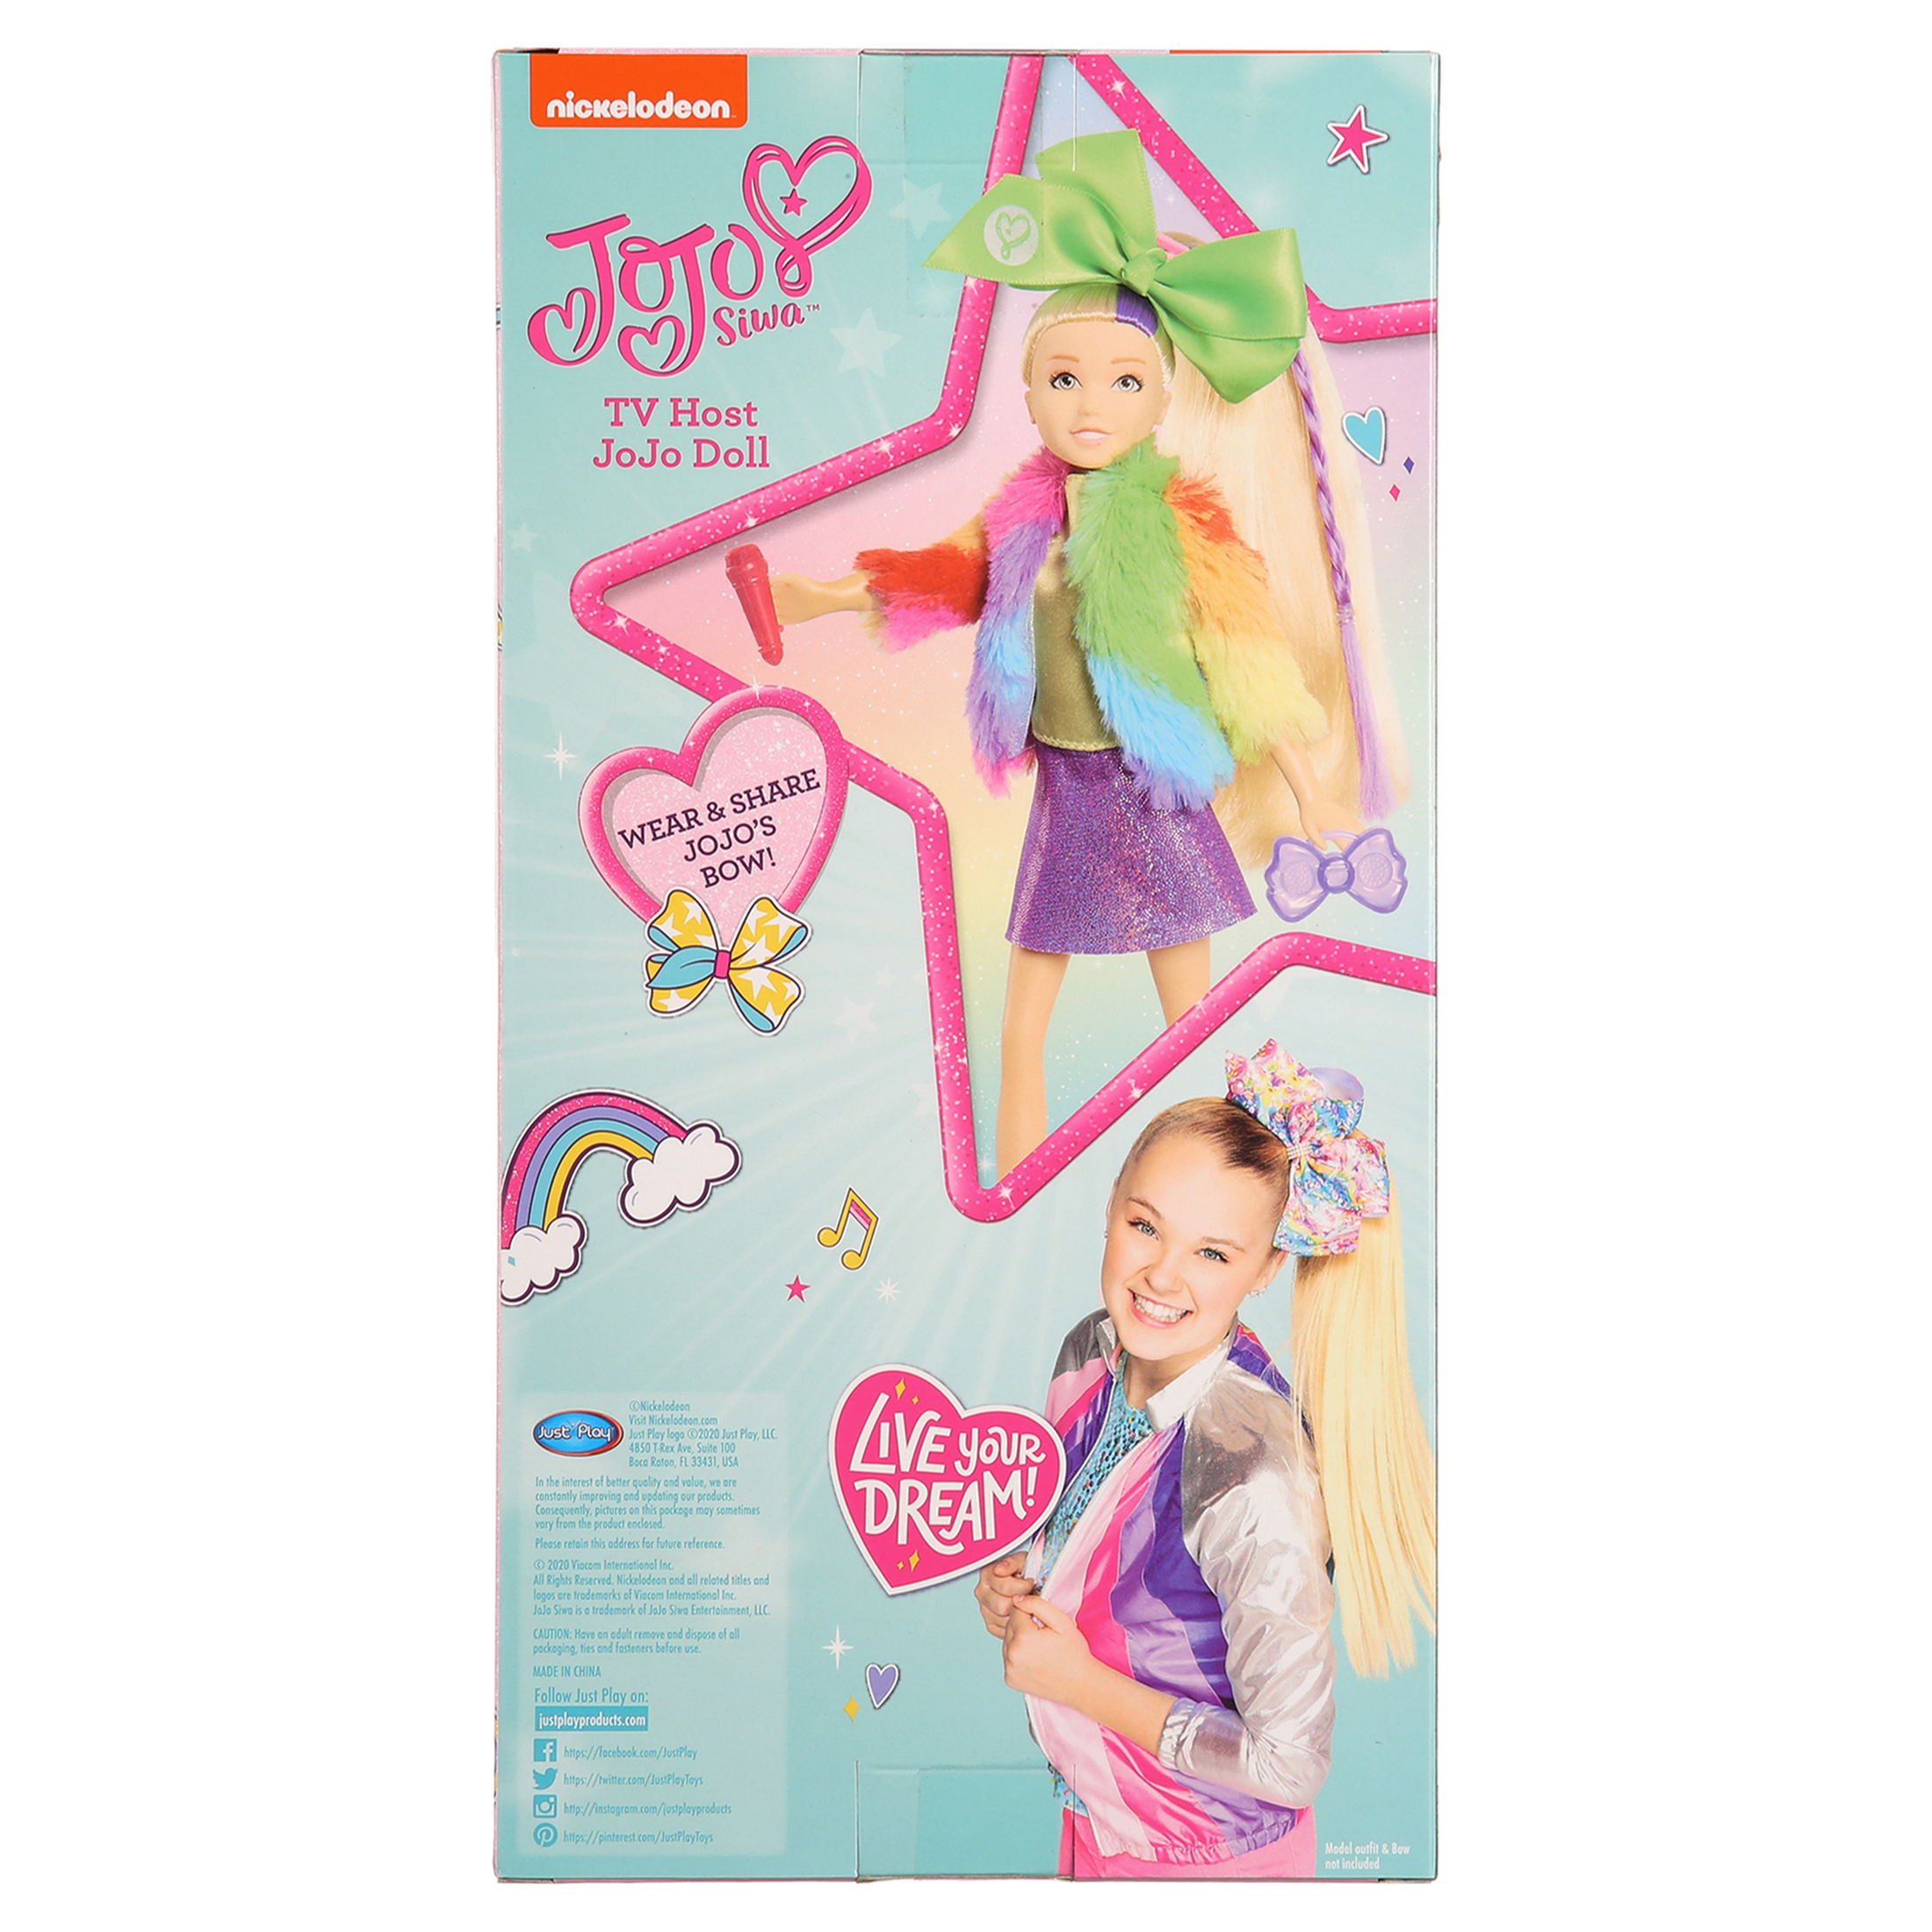 JoJo Siwa Fashion Doll, TV host, 10-inch doll,  Kids Toys for Ages 3 Up, Gifts and Presents - image 4 of 8